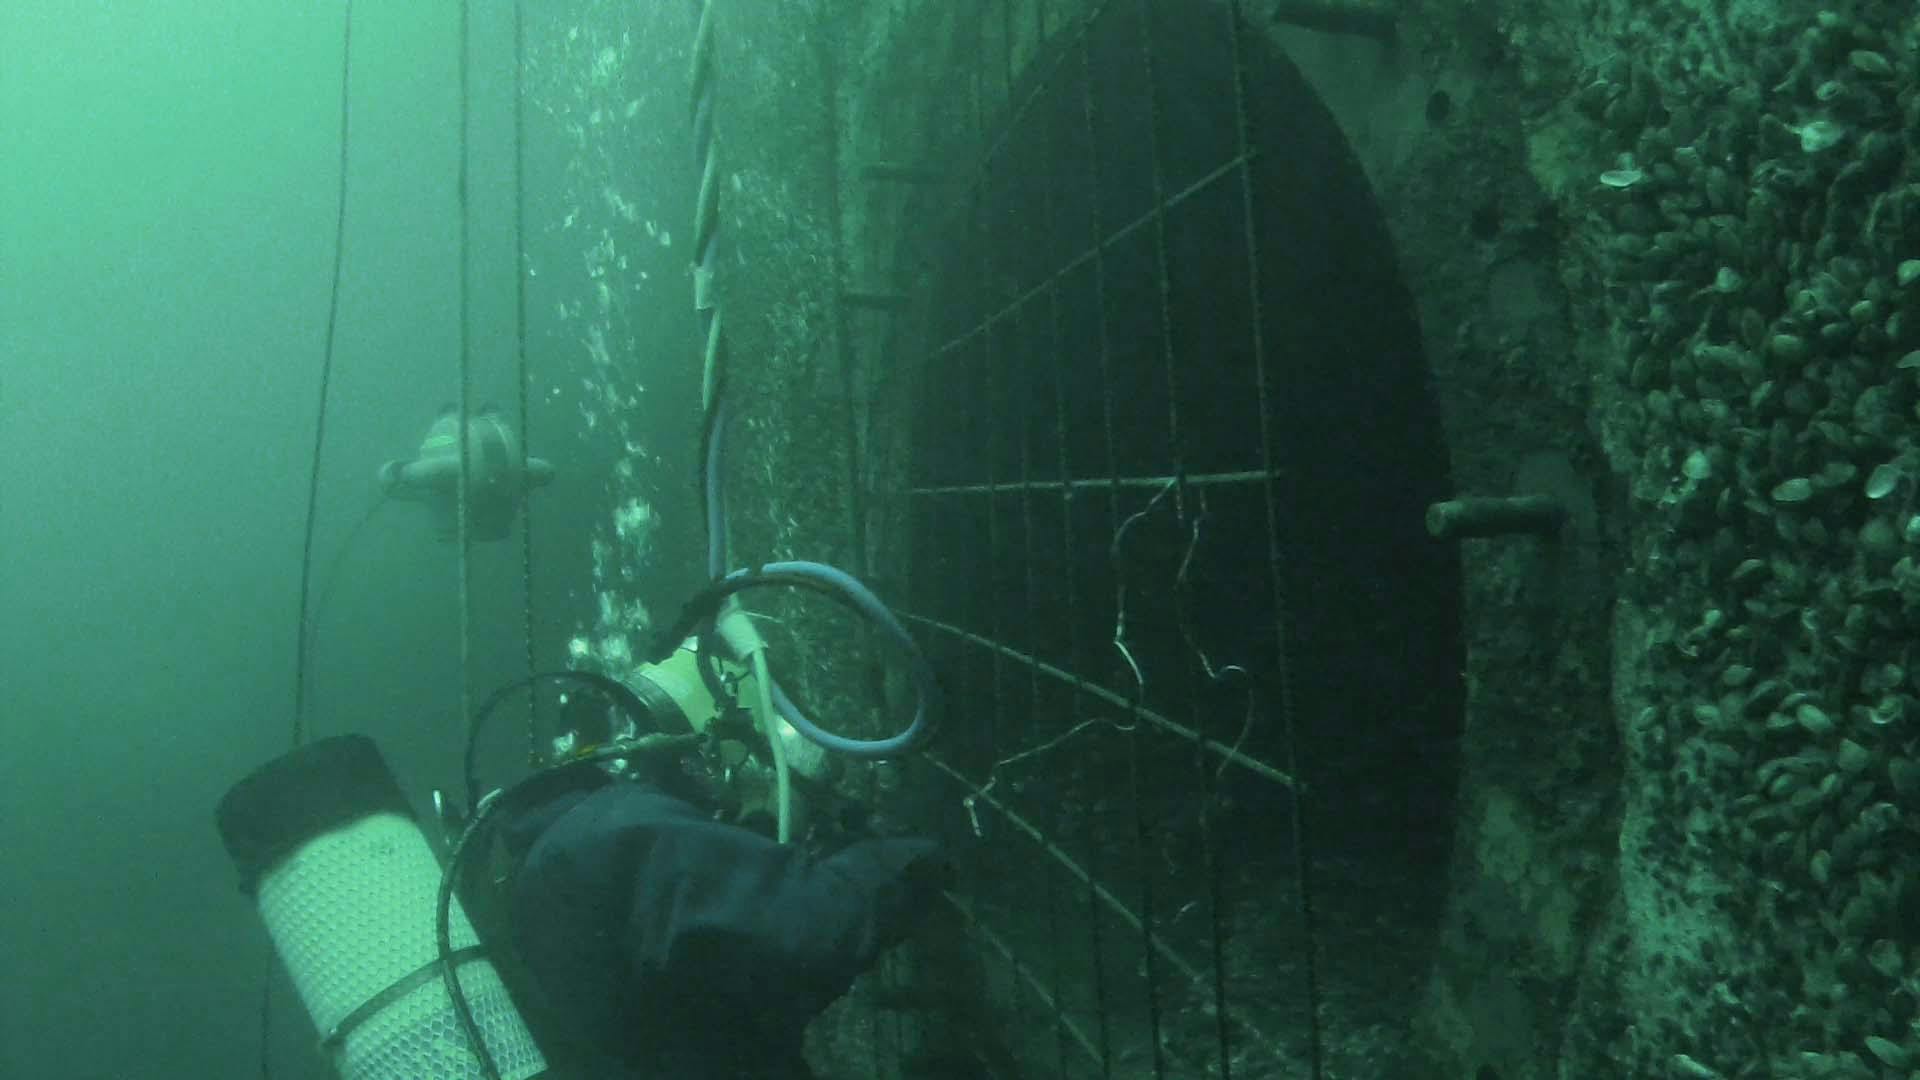 Diver fixing grate with DTG3 ROV in the background 